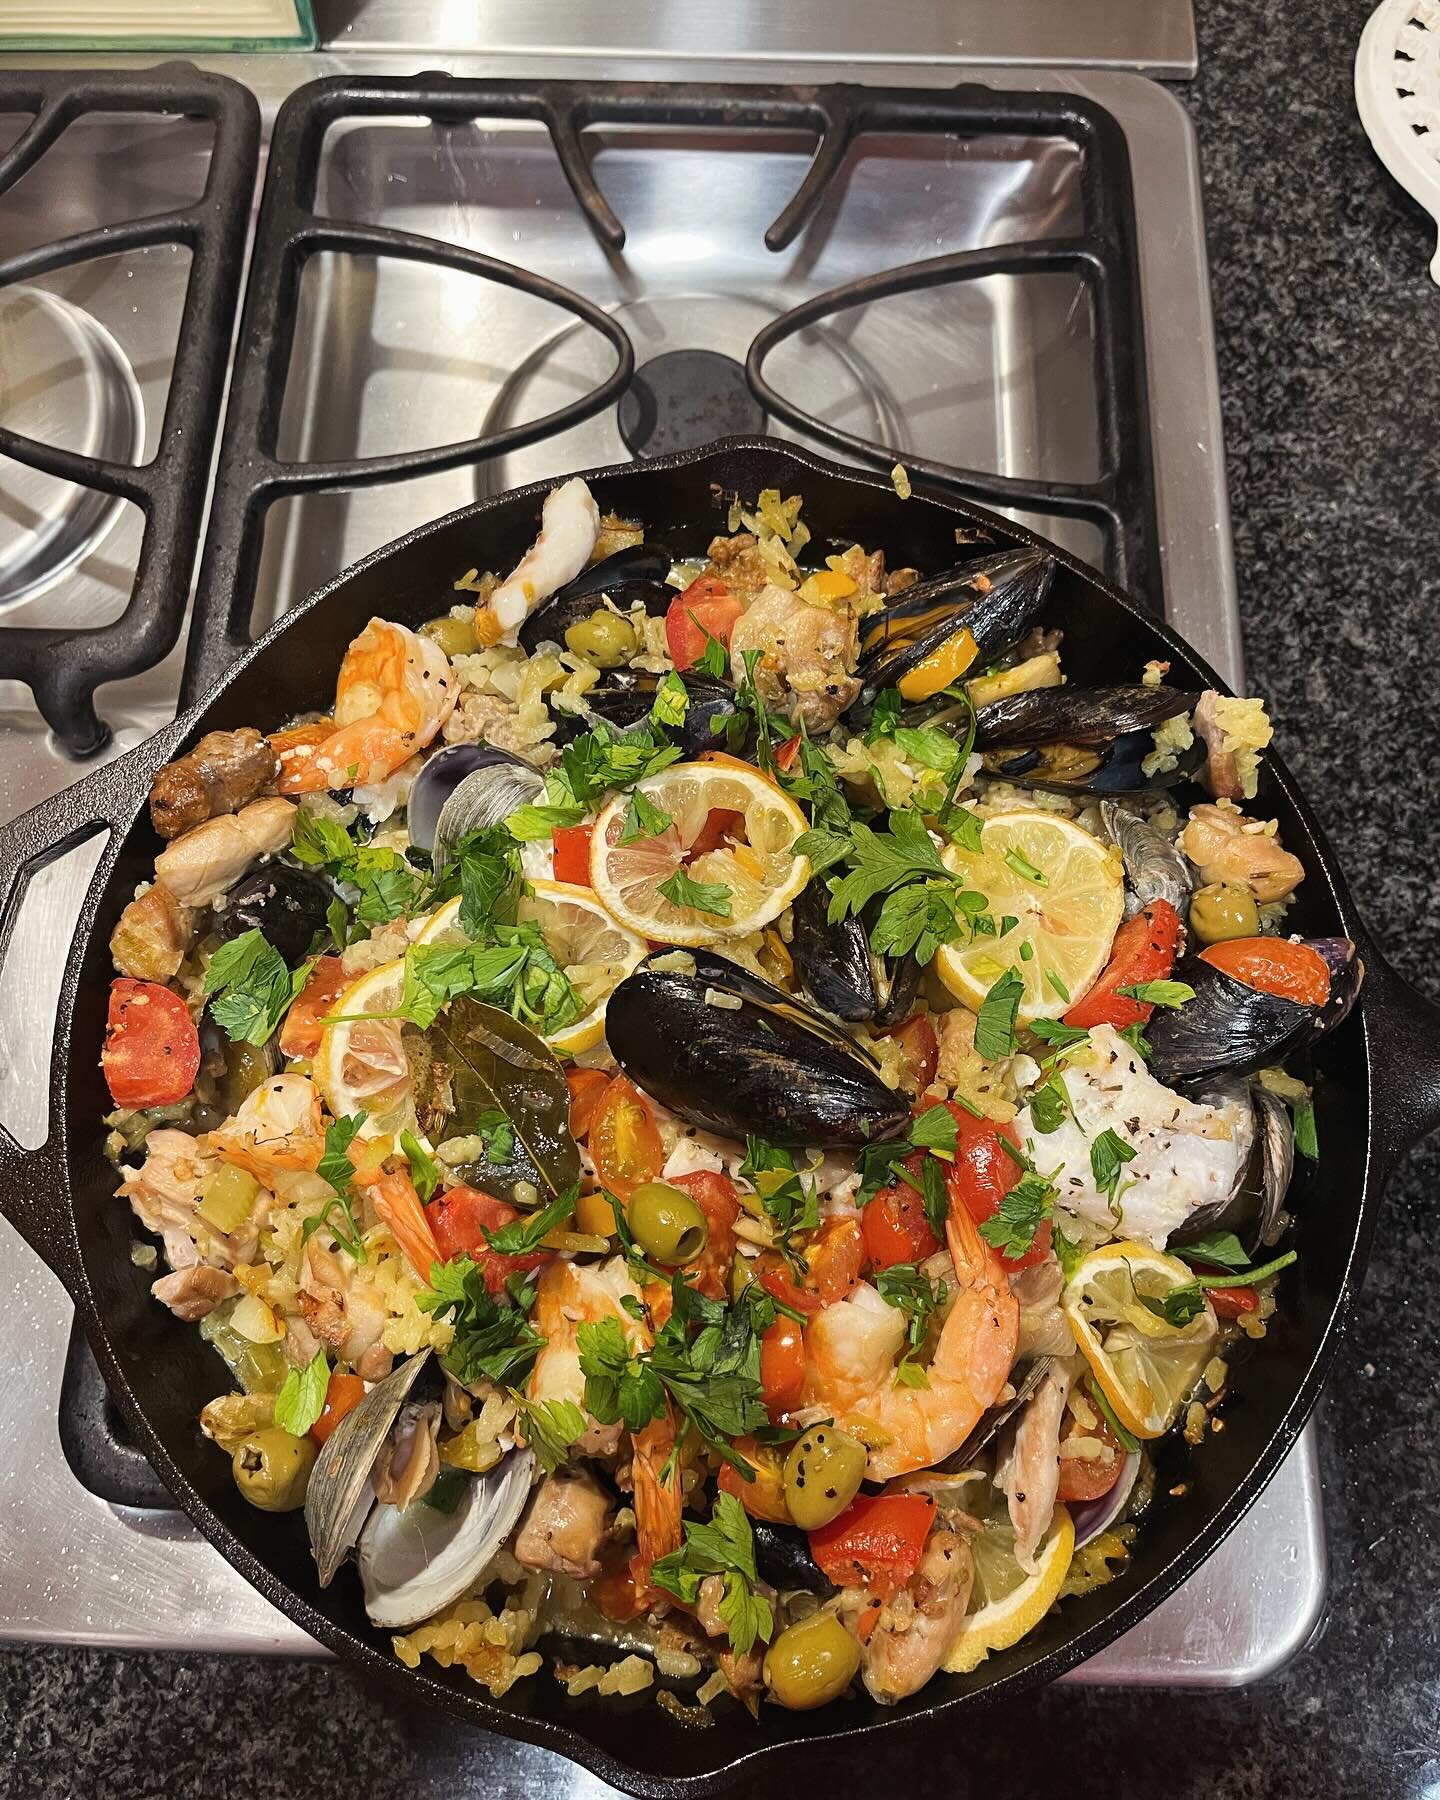 Paella is my go to dish for entertaining.  The house smells delicious also!